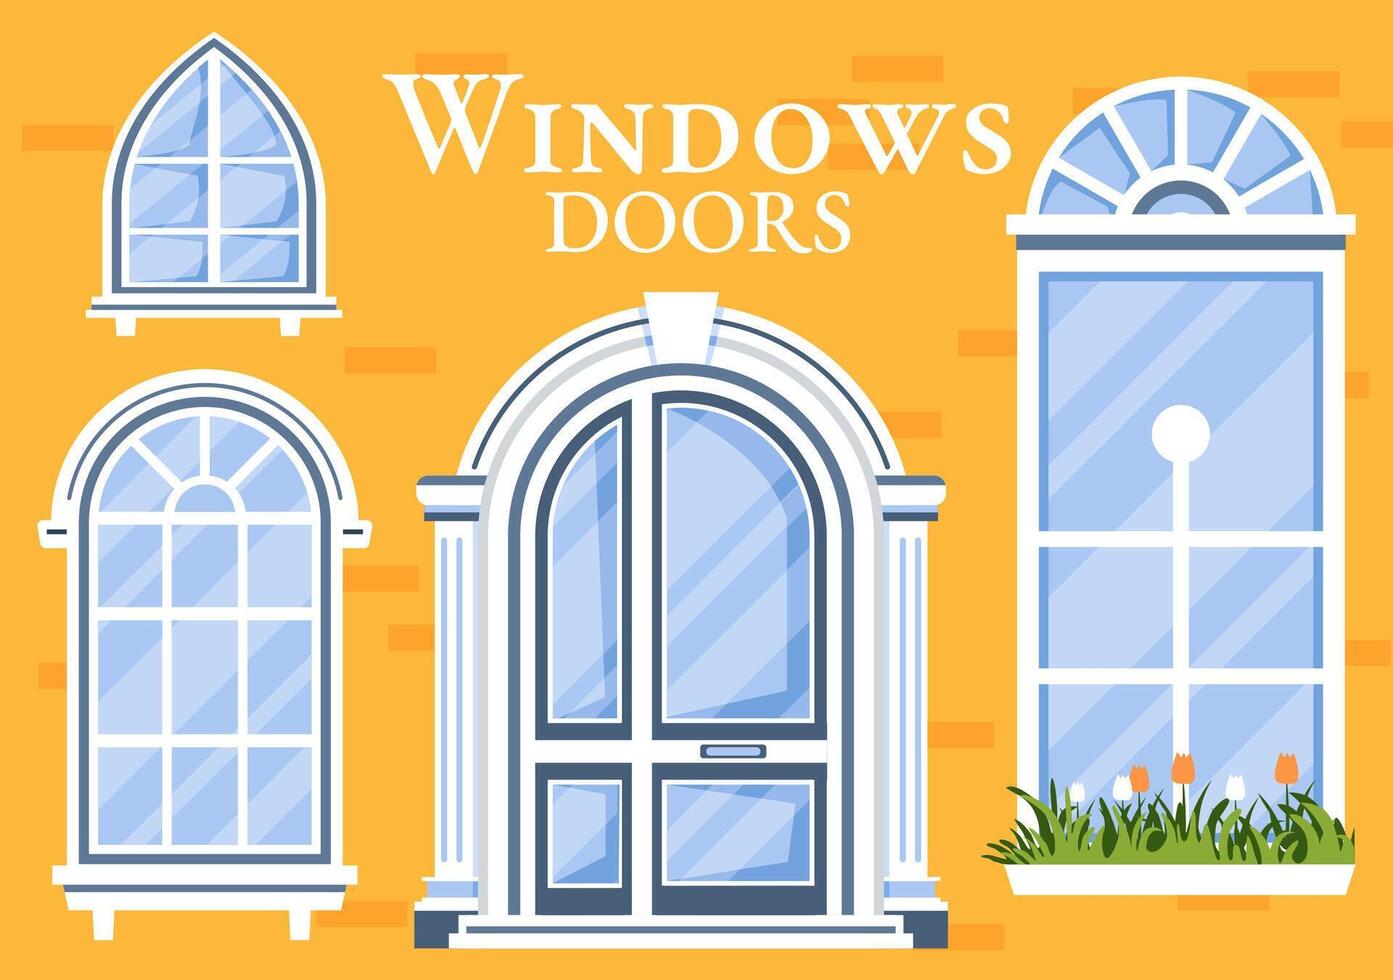 House Architecture Vector Illustration with Doors and Windows Various Shapes, Colors and Sizes in Flat Cartoon Background